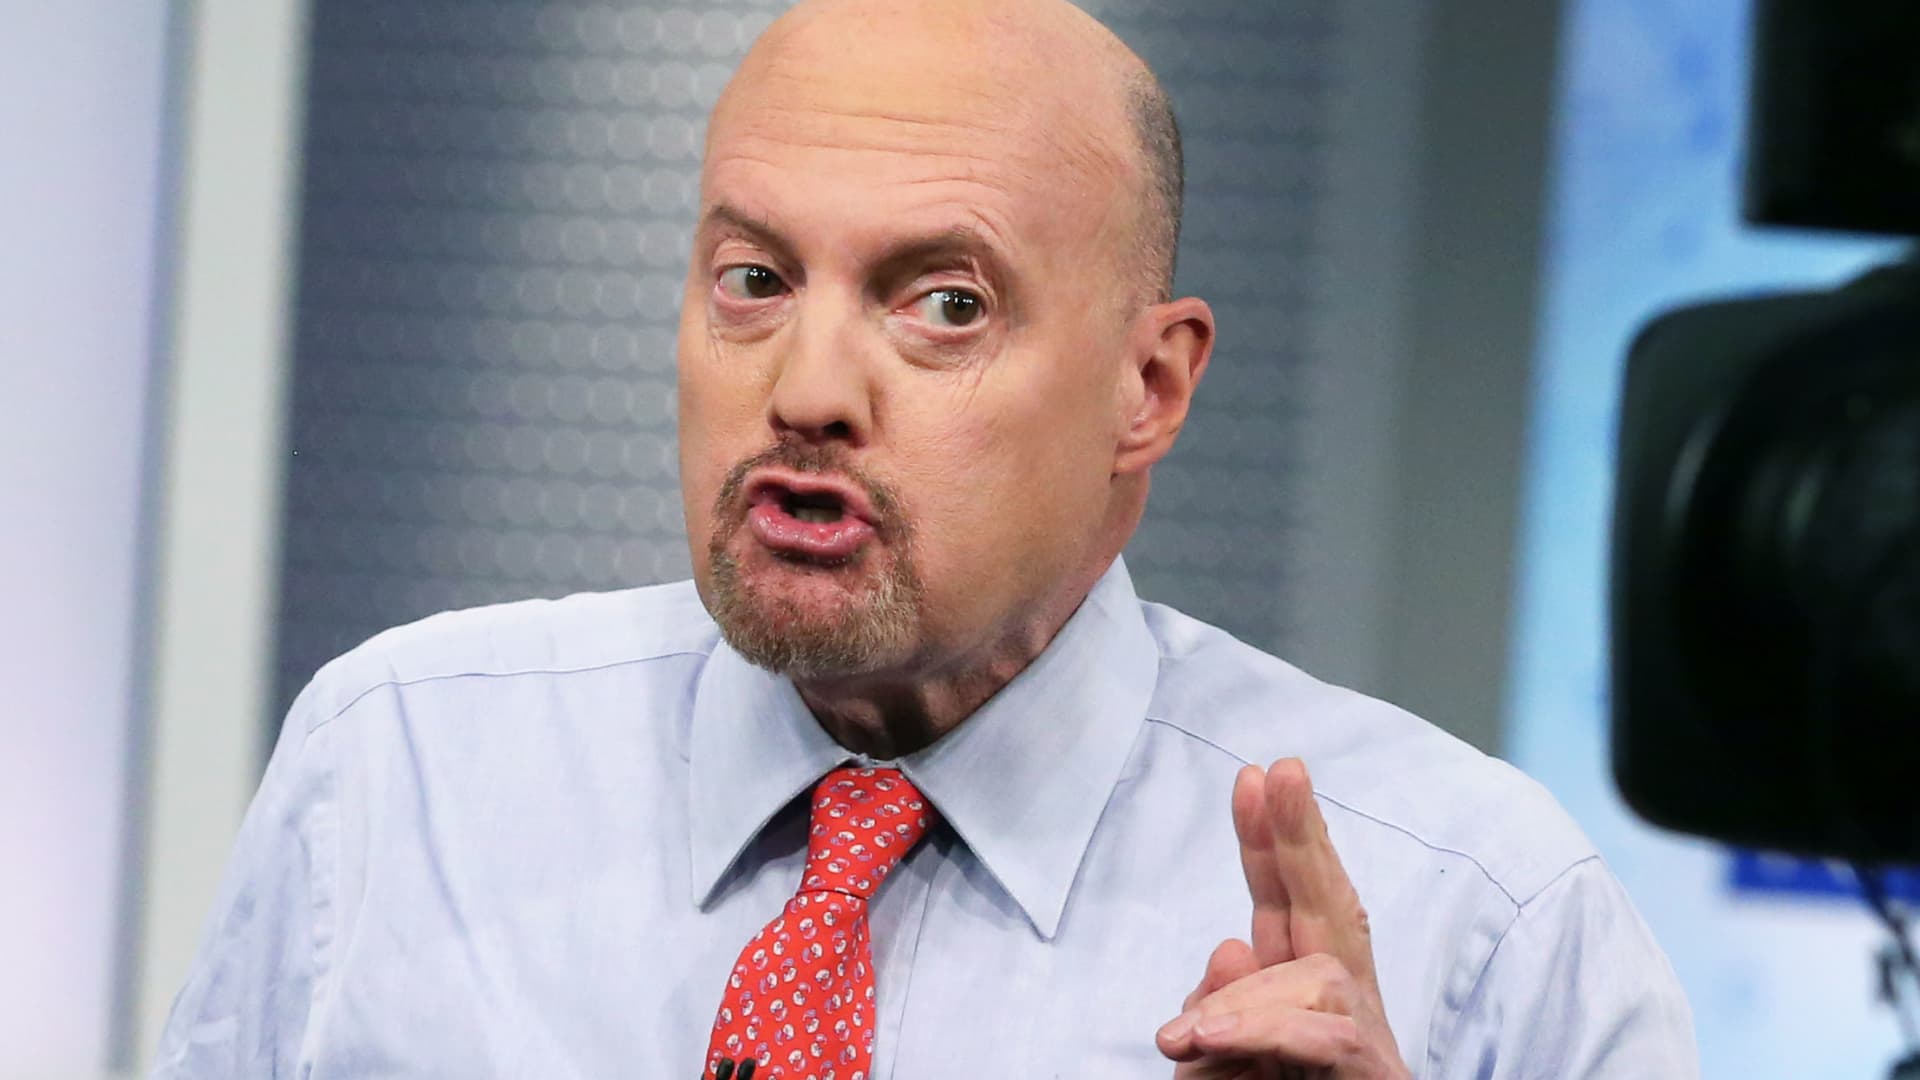 Hold your nose and sell to brace for a possible market downturn, Jim Cramer says